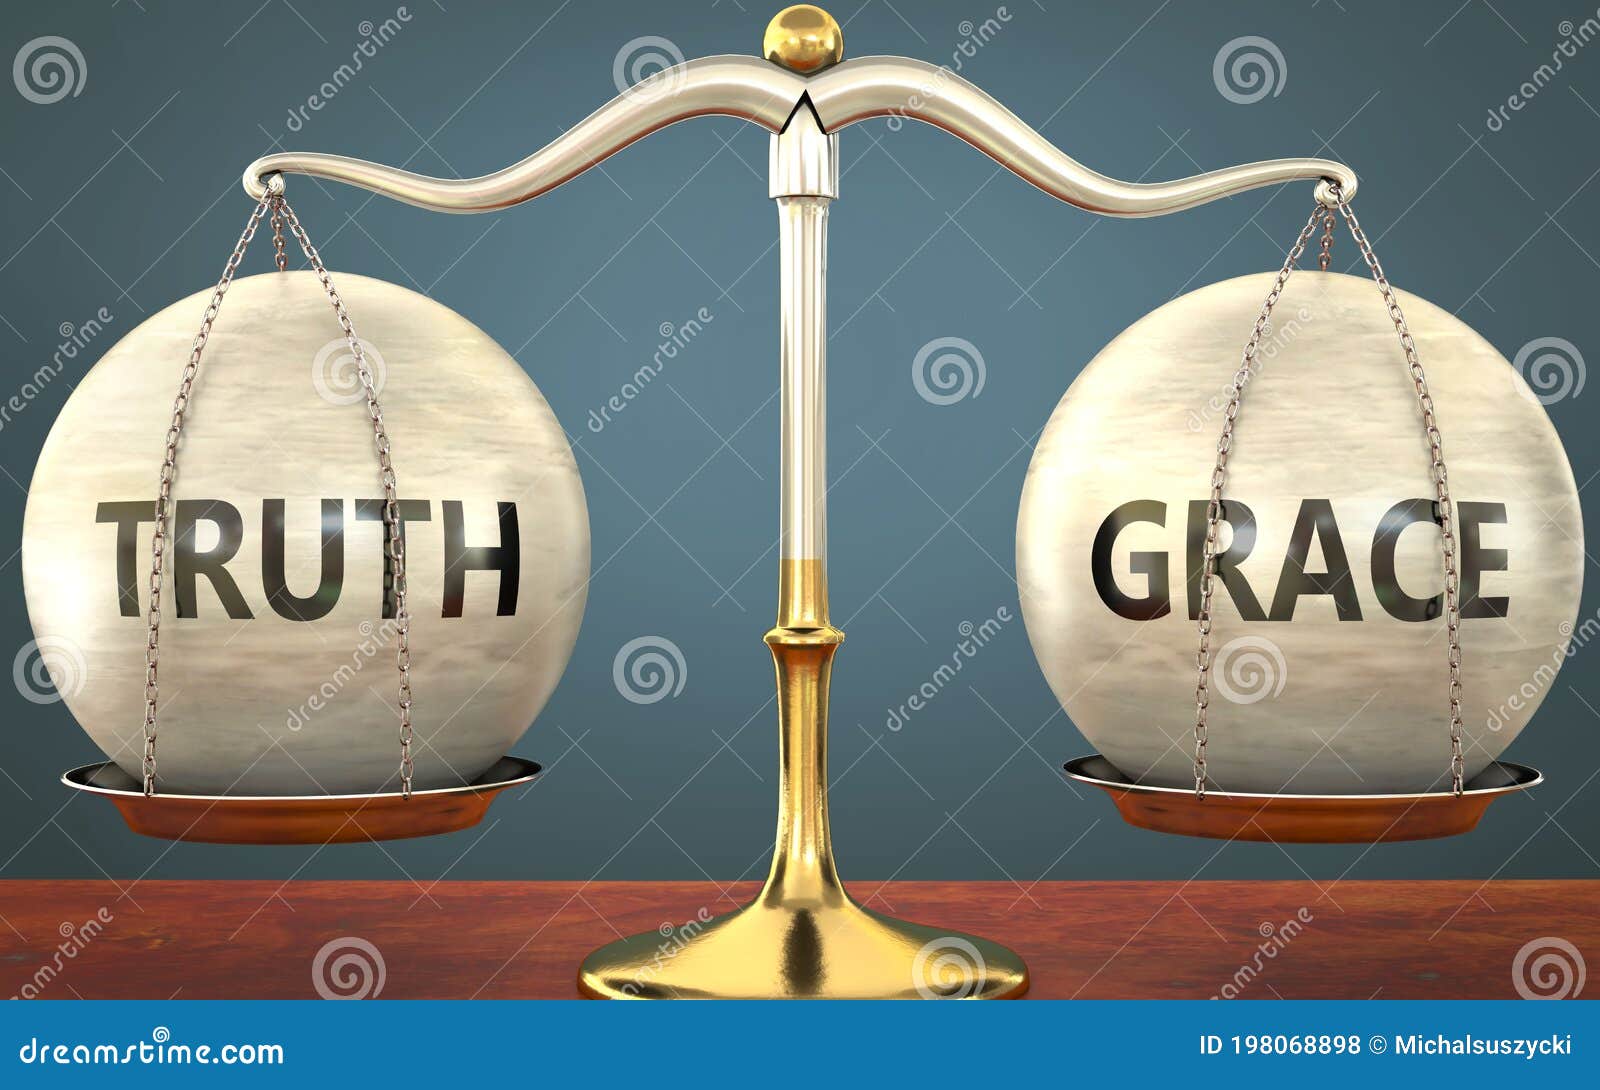 truth and grace staying in balance - pictured as a metal scale with weights and labels truth and grace to ize balance and